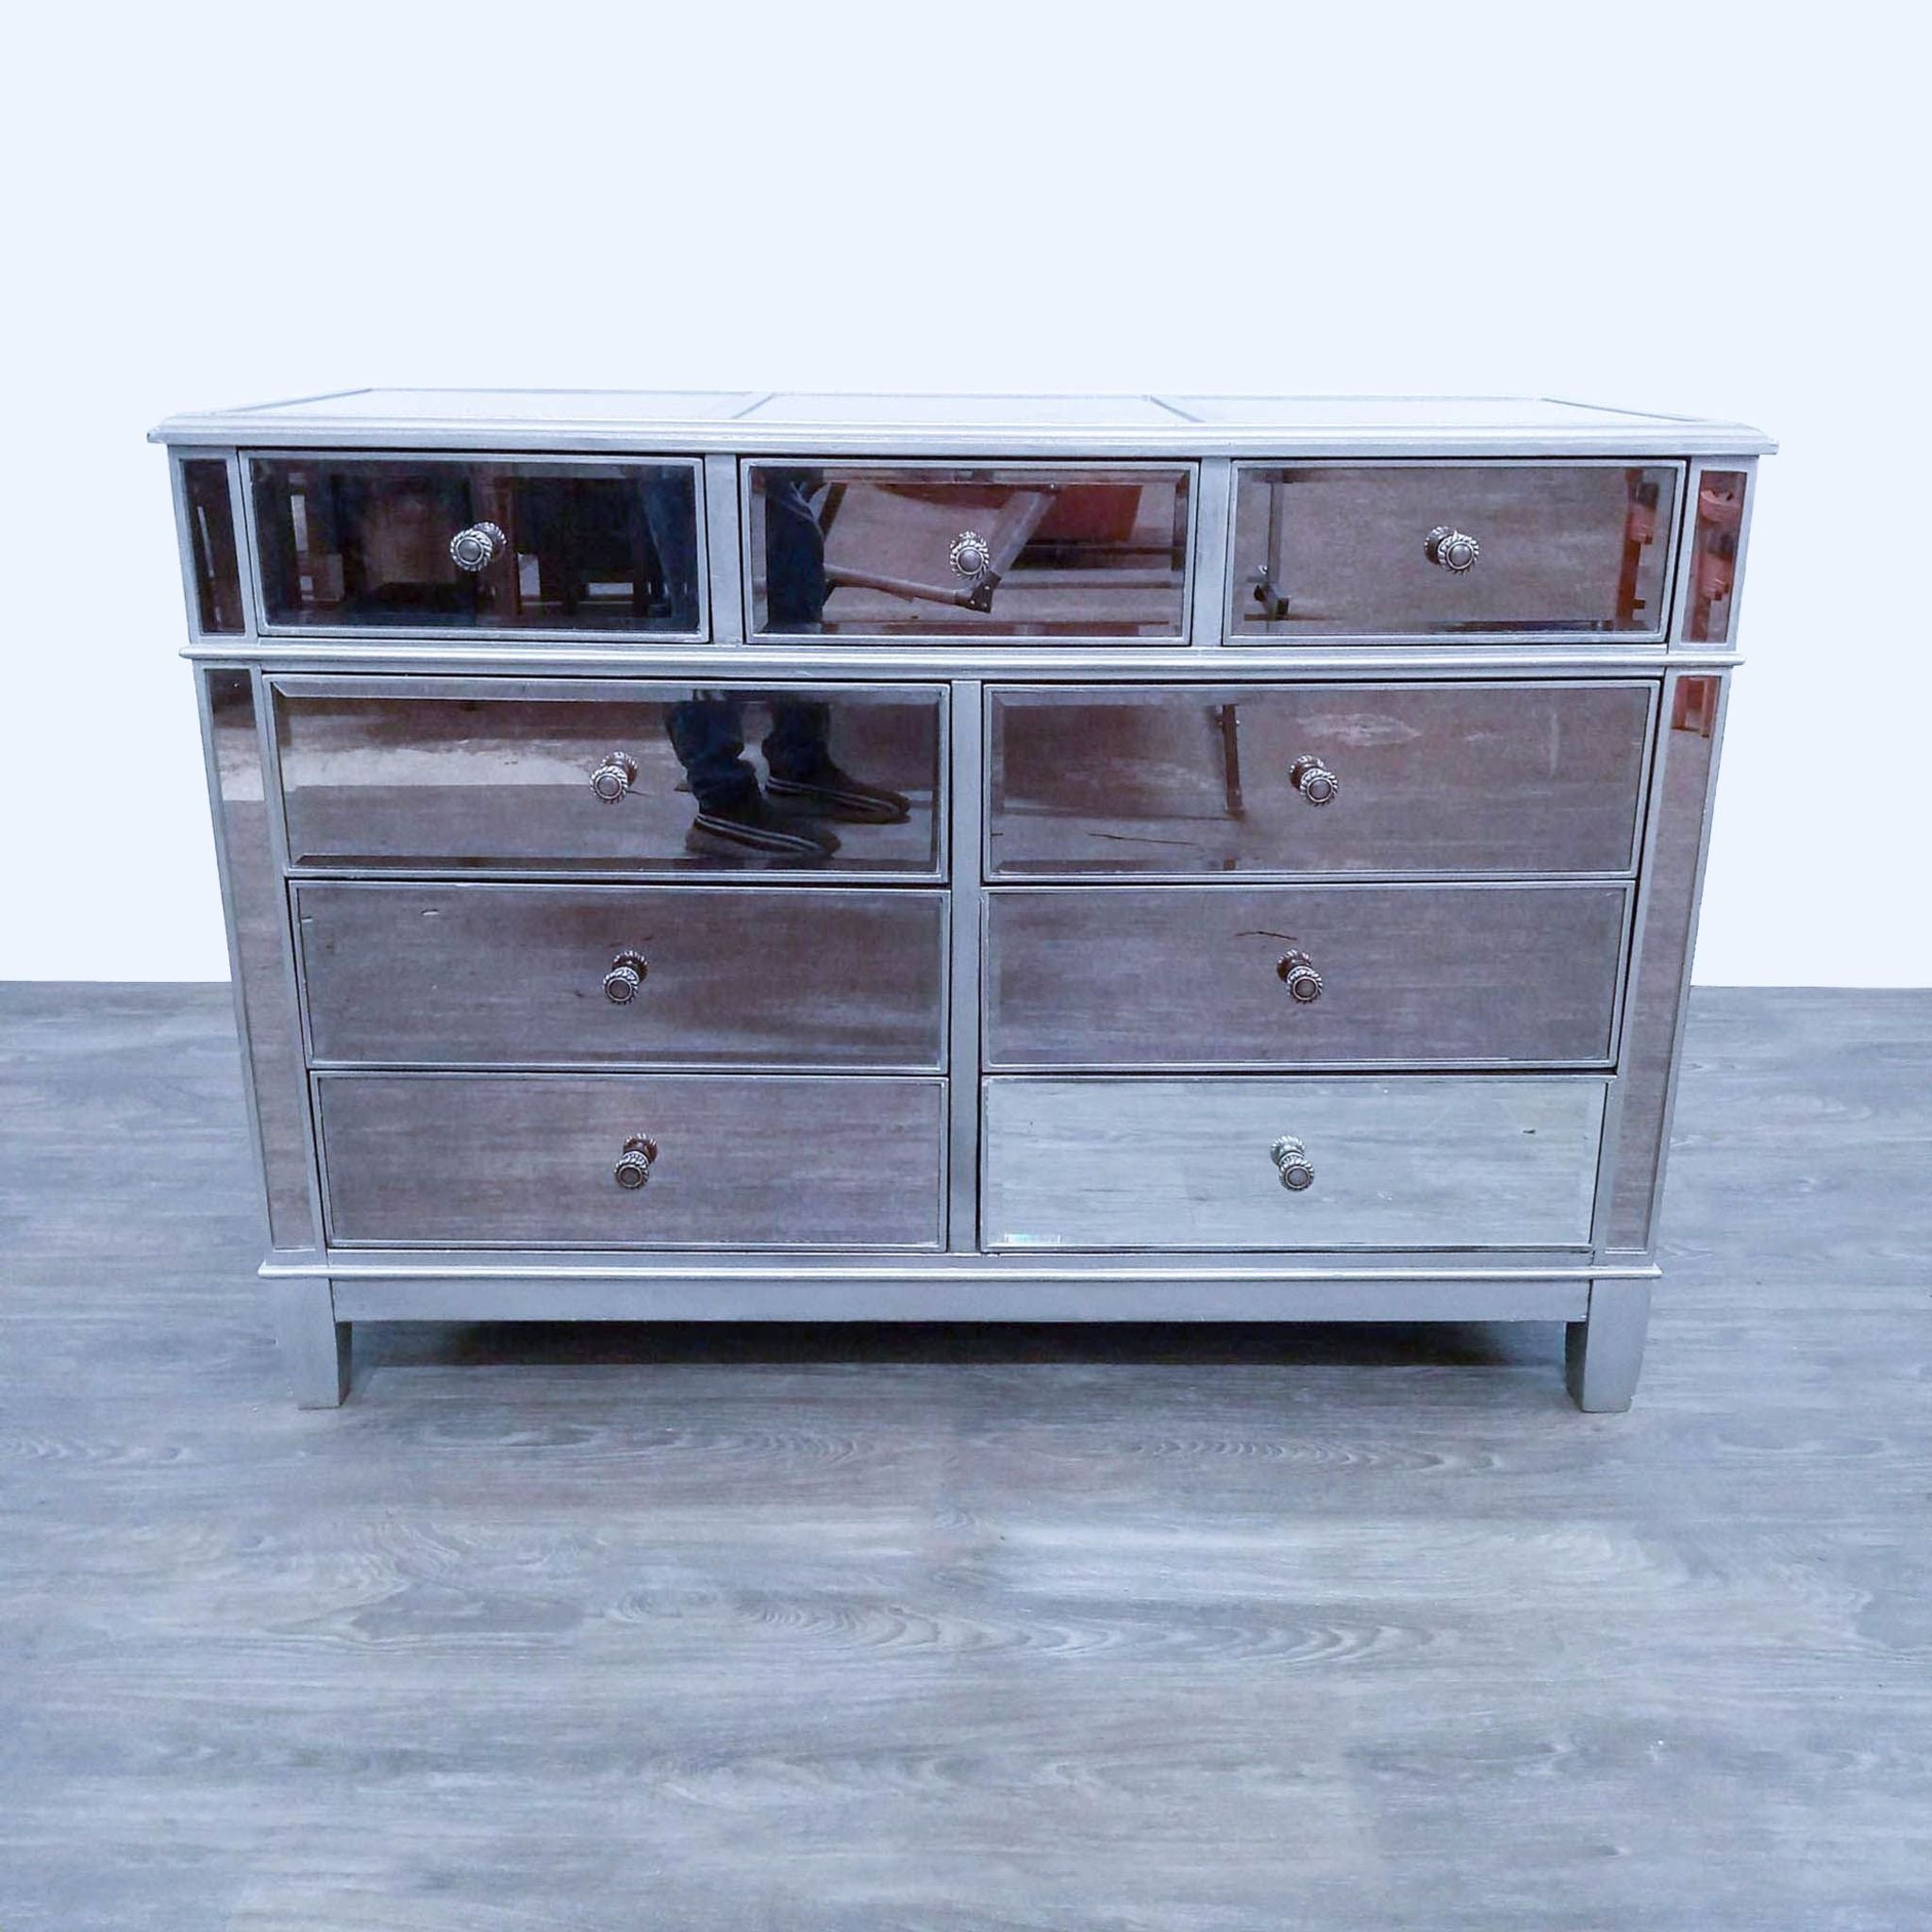 Hayworth dresser by Pier 1 Imports with mirrored front drawers and silver wood frame, viewed frontally on a grey floor.